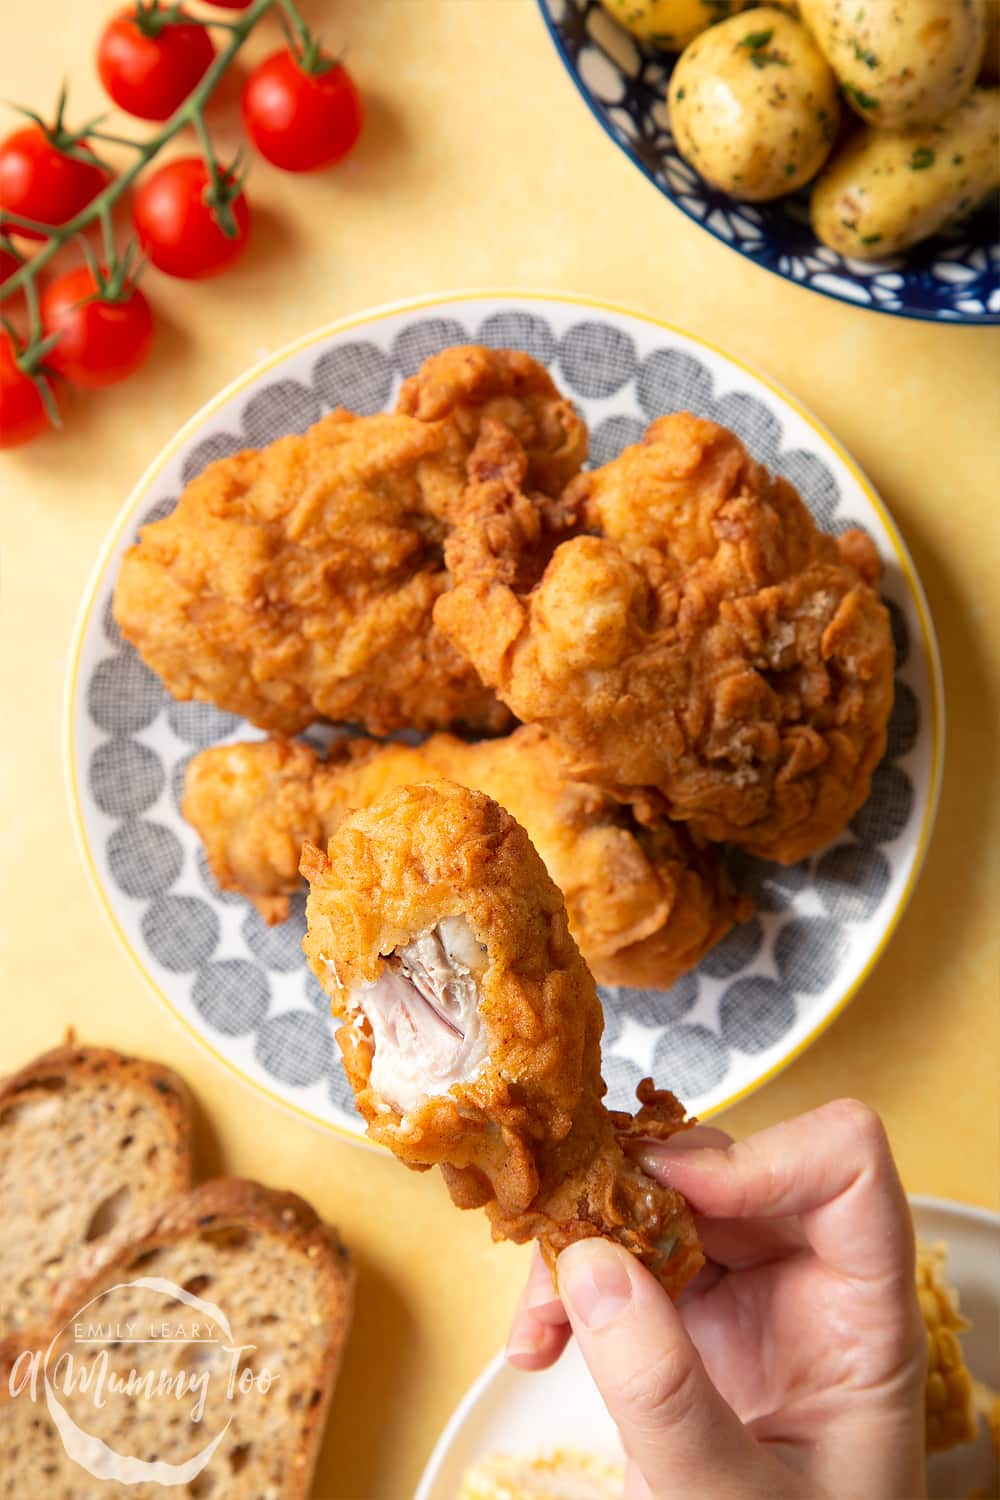 Buttermilk Fried Chicken Gordon Ramsay S Recipe A Mummy Too,What Is Fondant Made Out Of